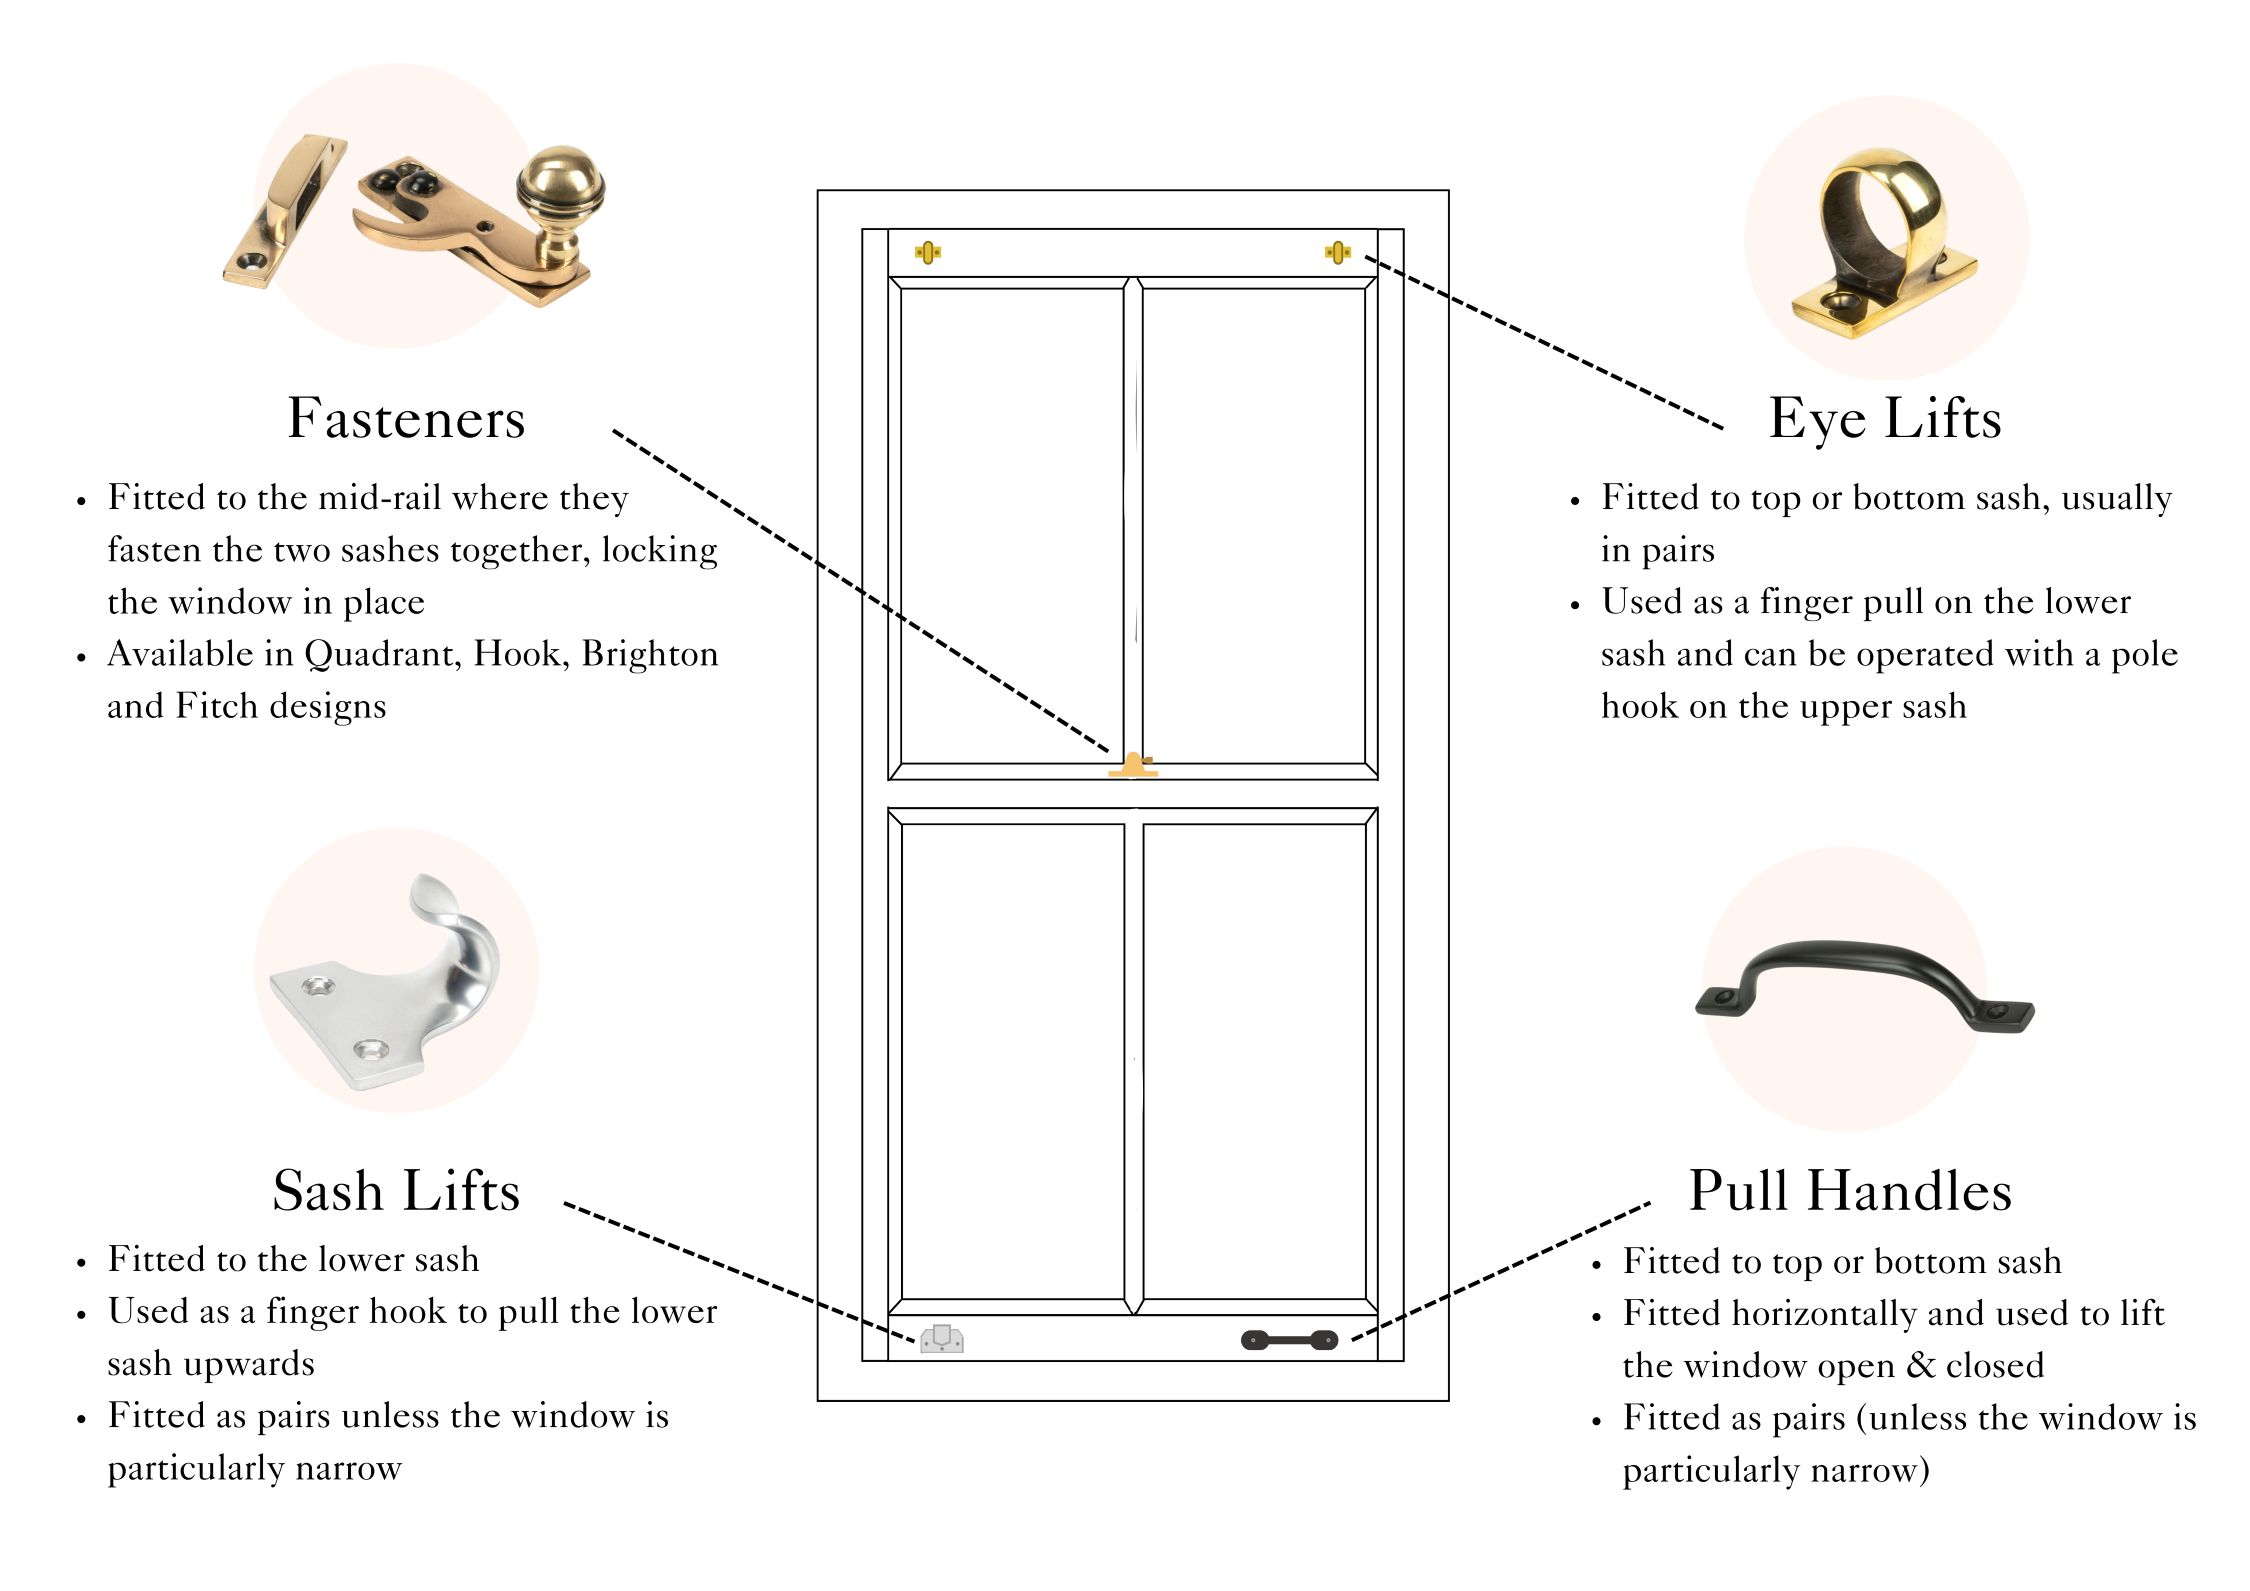 Diagram of a sash window pointing to different types of sash hardware including fasteners, eye lifts, sash lifts, and pull handles, with a brief explanation of each type.